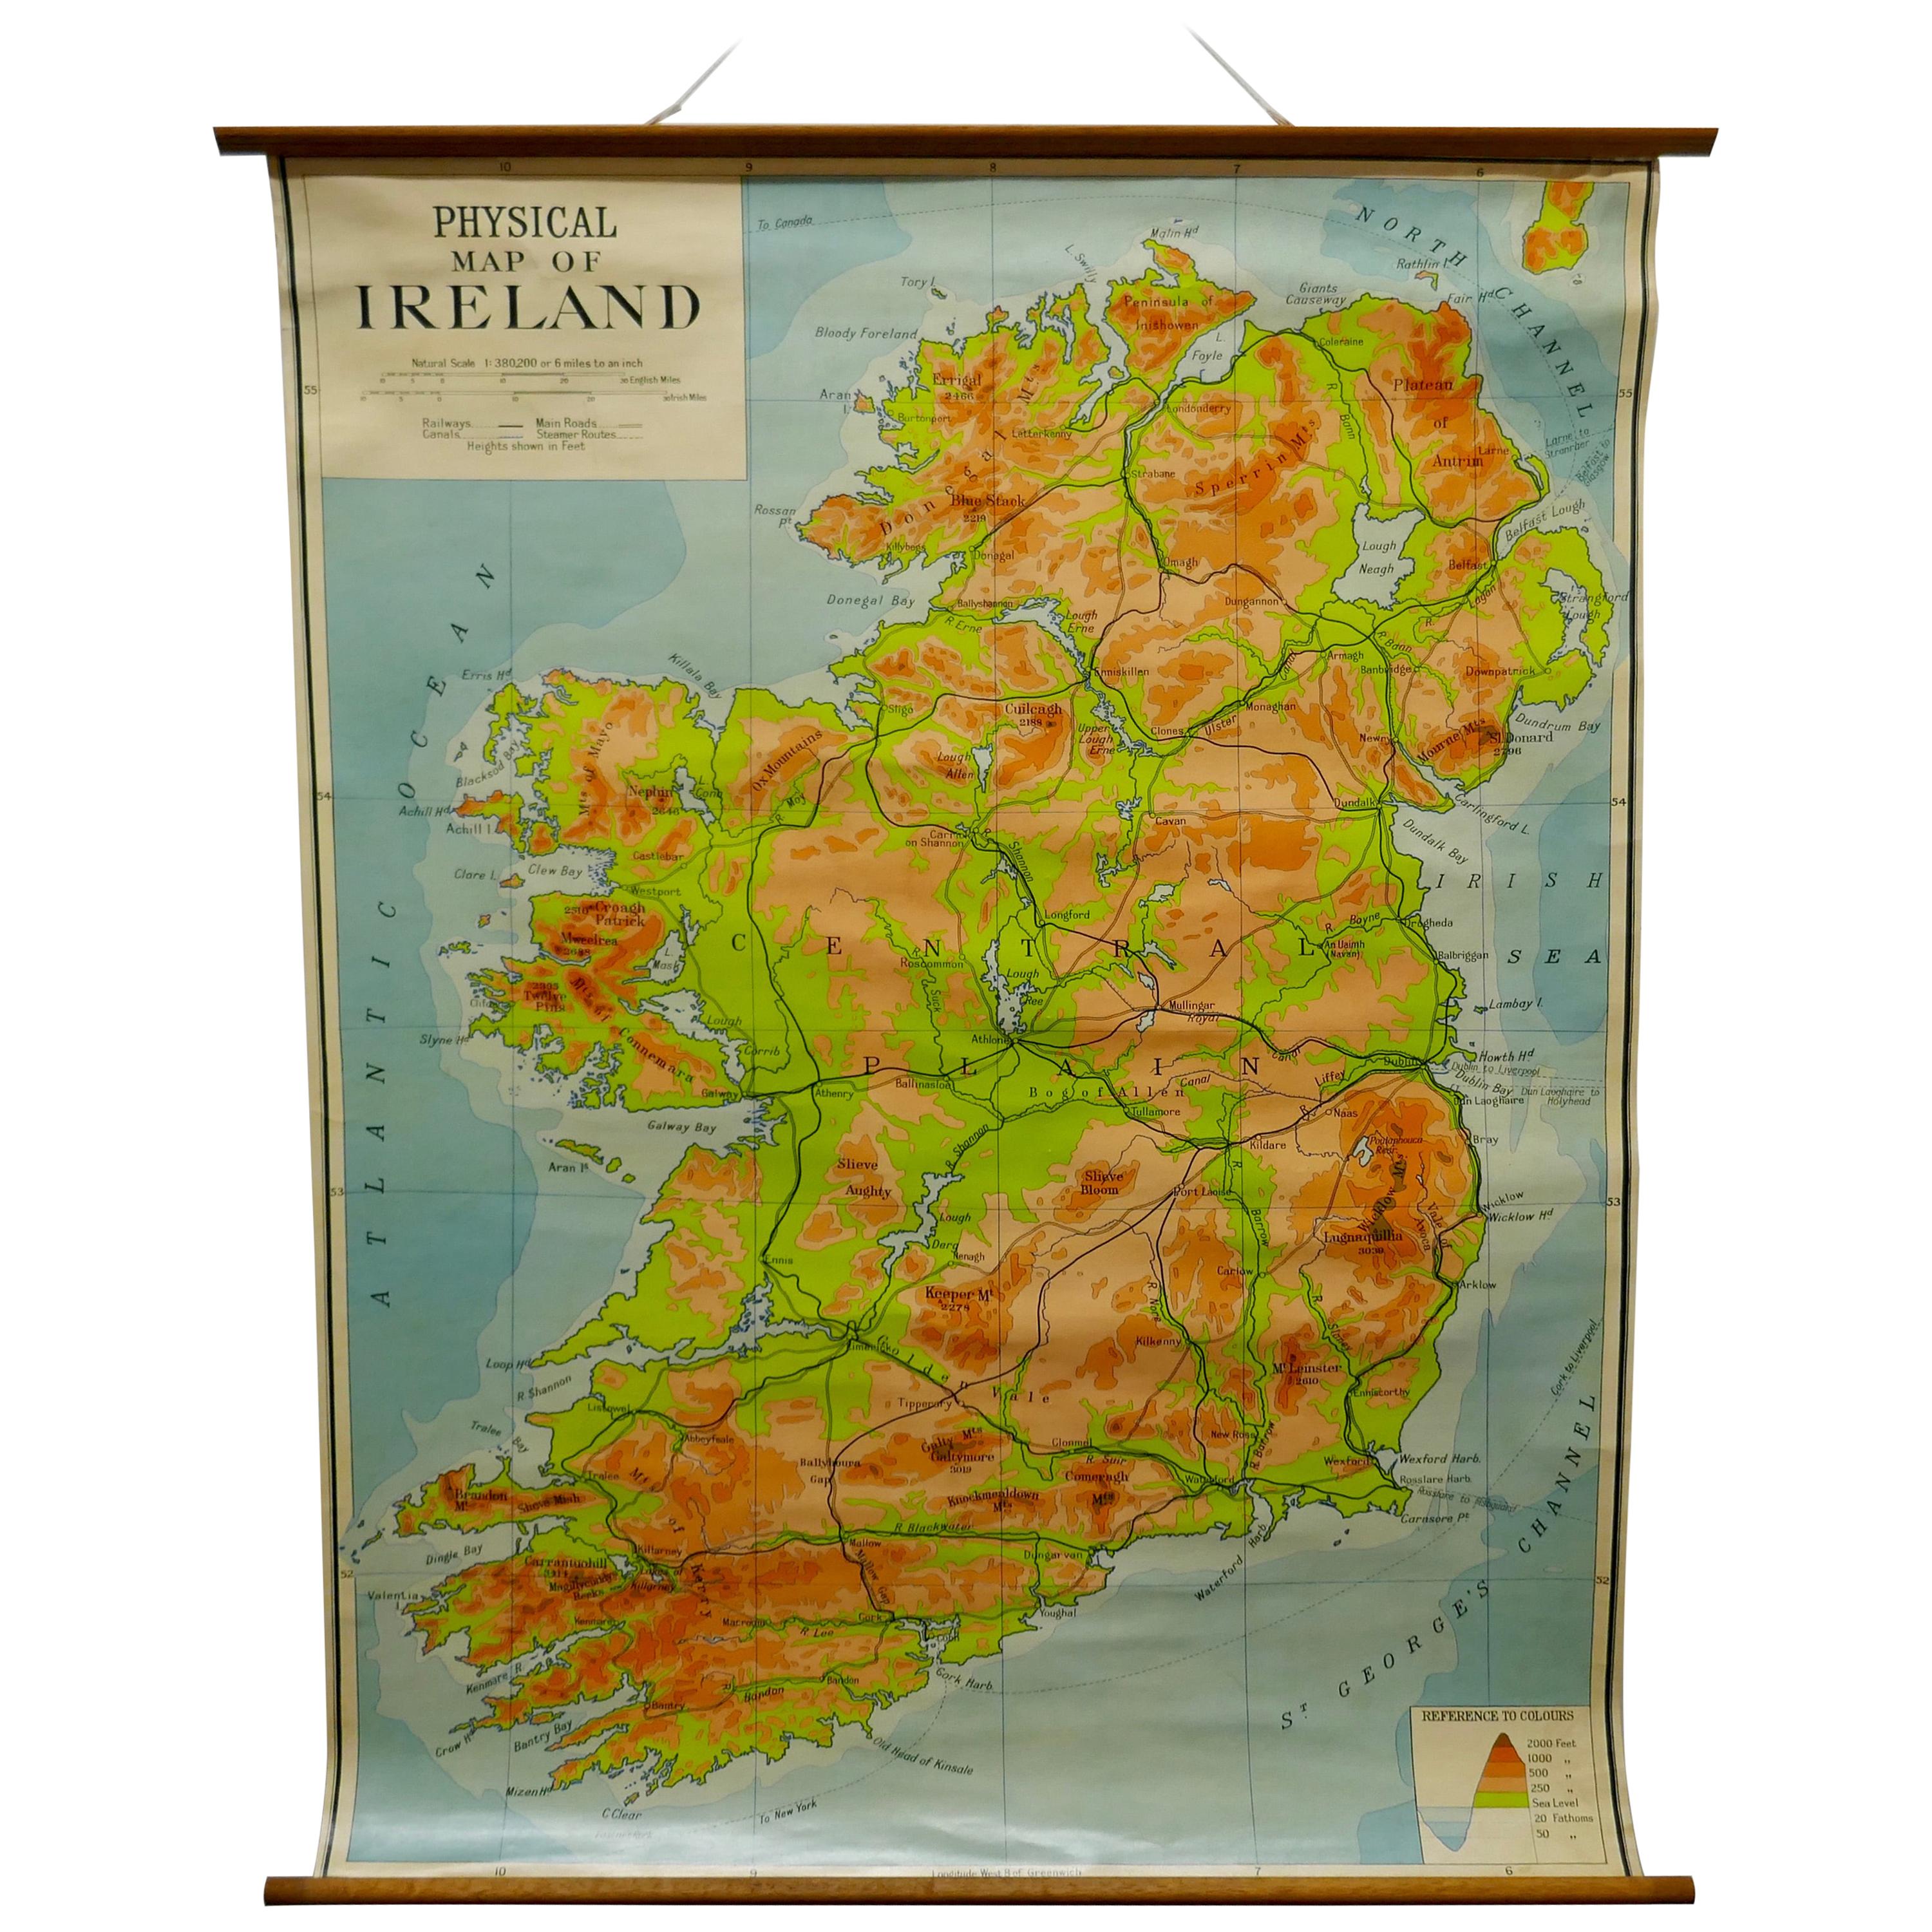 Large University Chart “Physical Map of Ireland” by Bacon